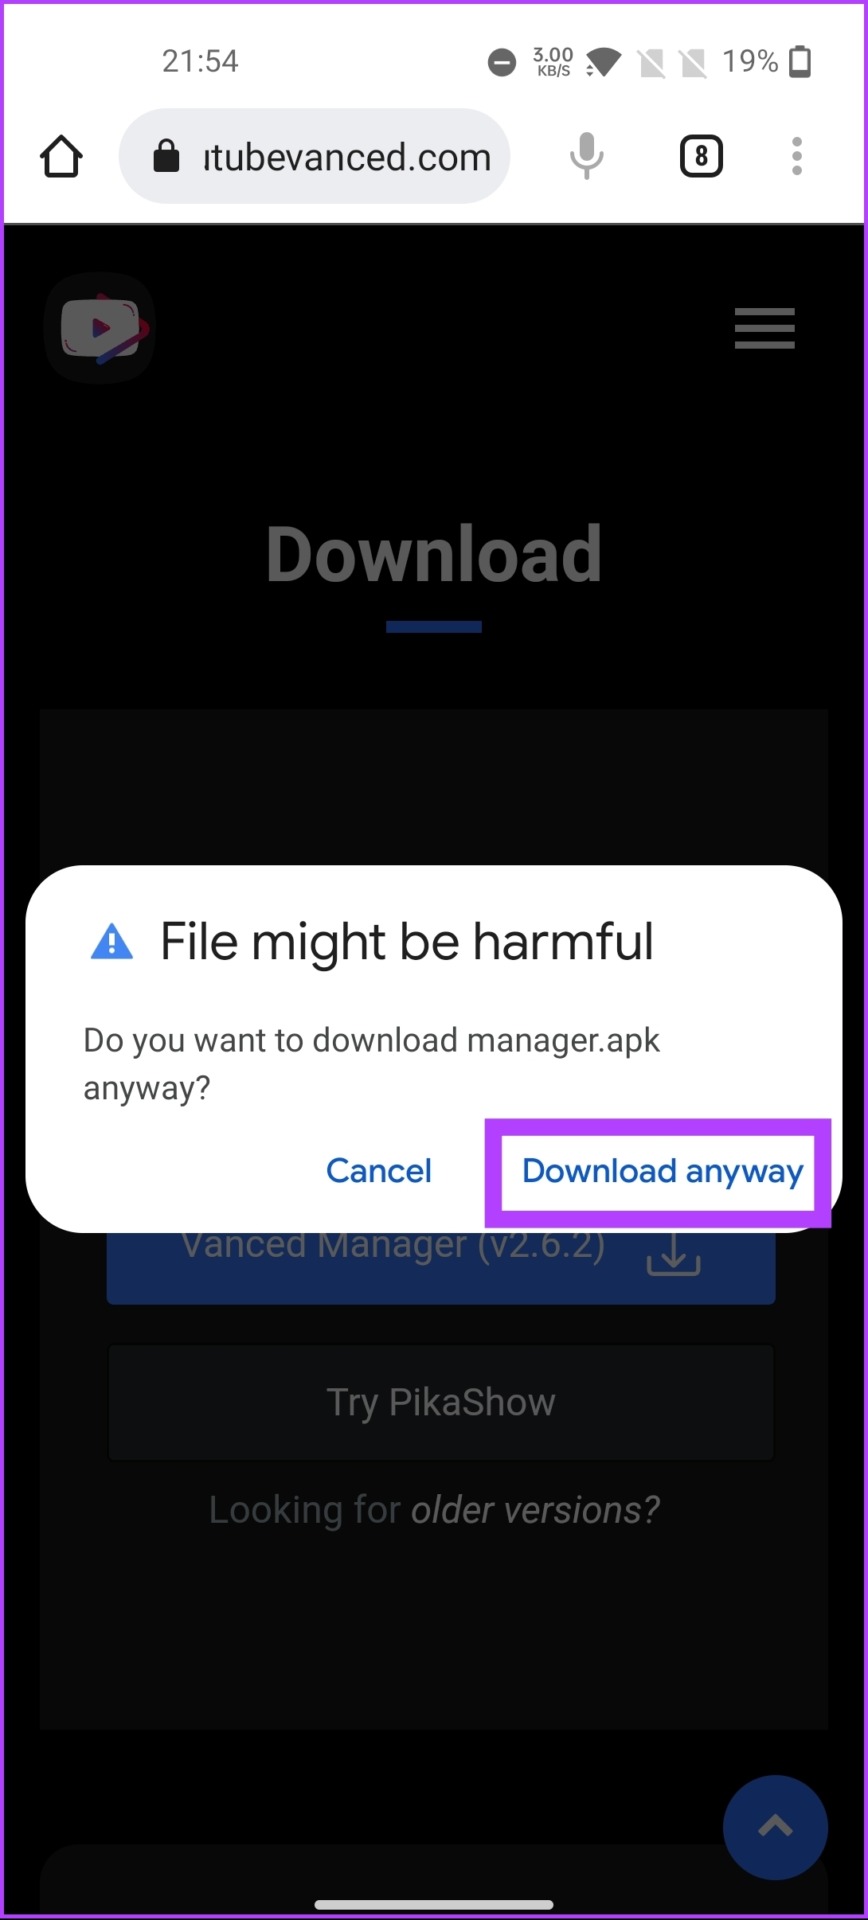 Click Download anyway